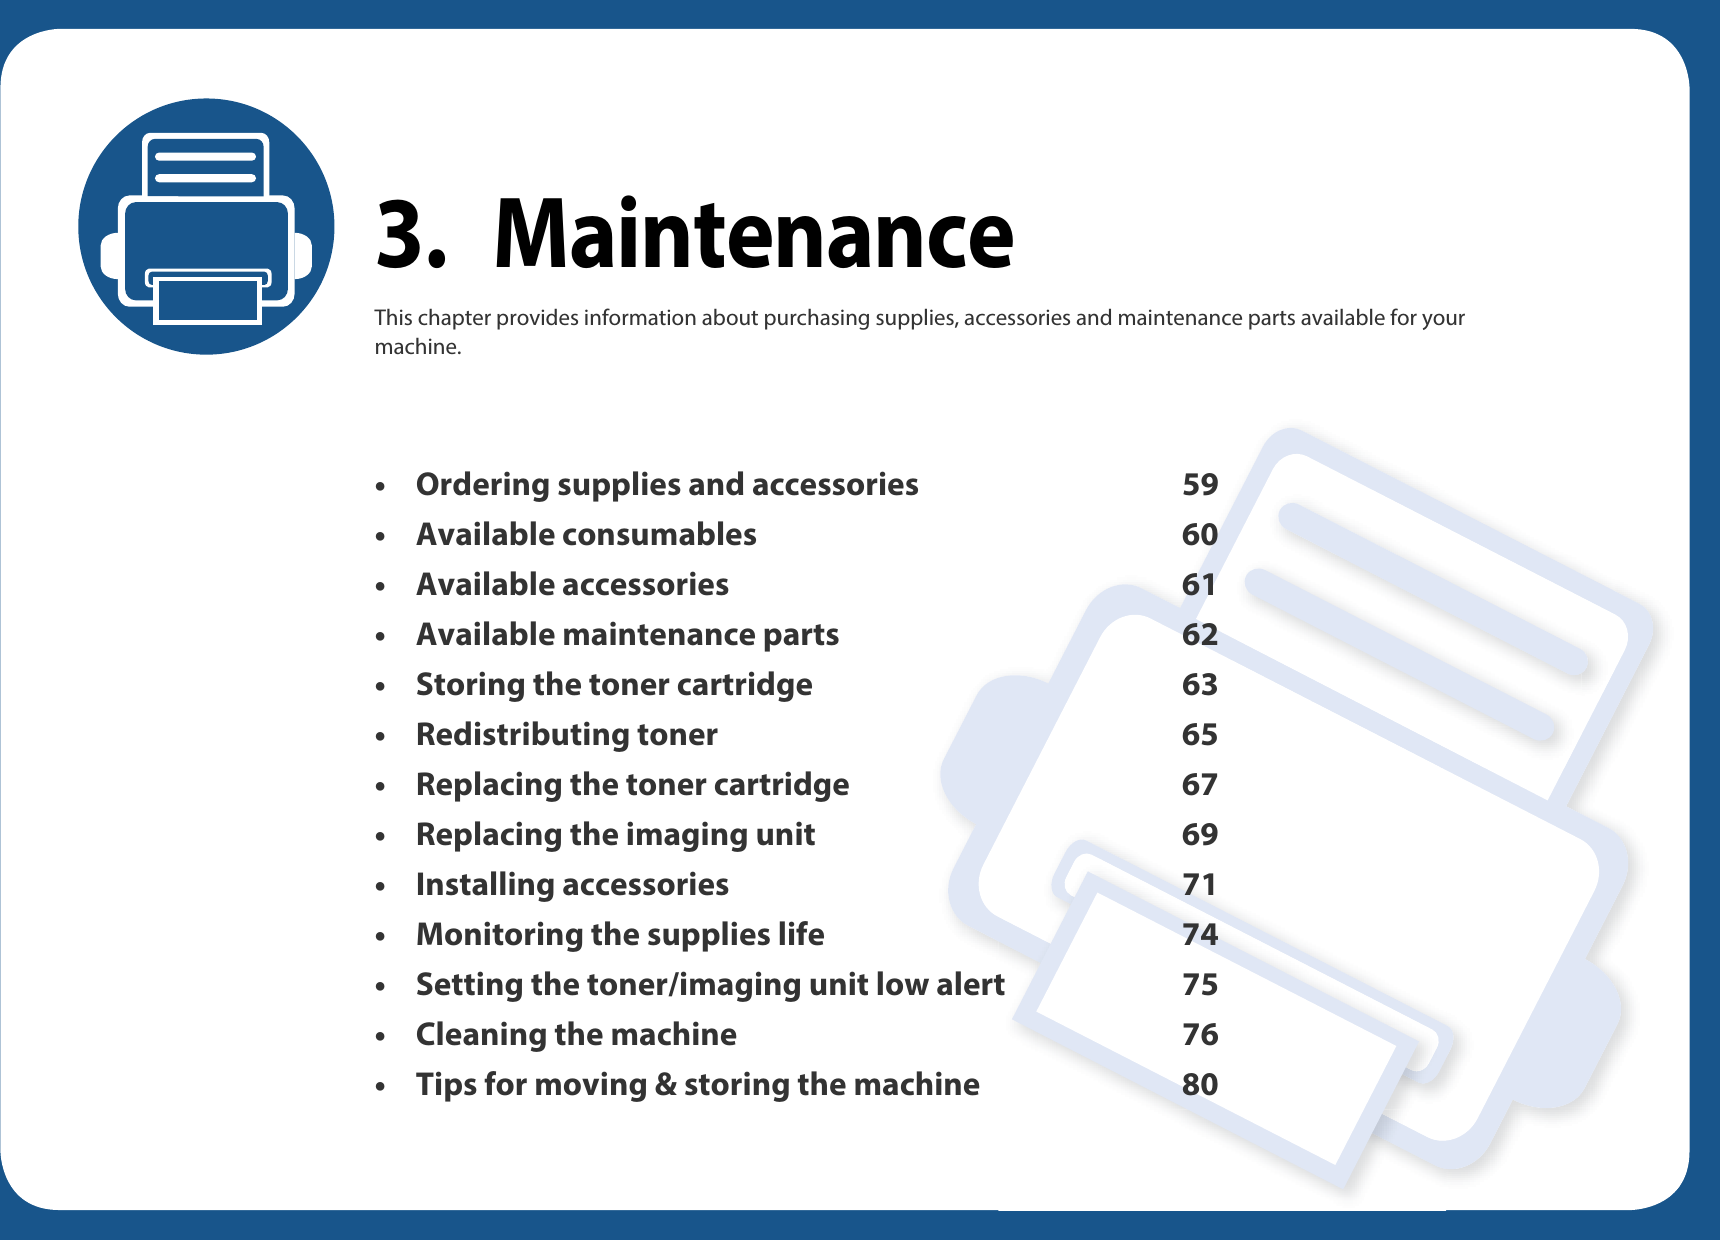 3. MaintenanceThis chapter provides information about purchasing supplies, accessories and maintenance parts available for your machine.• Ordering supplies and accessories 59• Available consumables 60• Available accessories 61• Available maintenance parts 62• Storing the toner cartridge 63• Redistributing toner 65• Replacing the toner cartridge 67• Replacing the imaging unit 69• Installing accessories 71• Monitoring the supplies life 74• Setting the toner/imaging unit low alert 75• Cleaning the machine 76• Tips for moving &amp; storing the machine 80